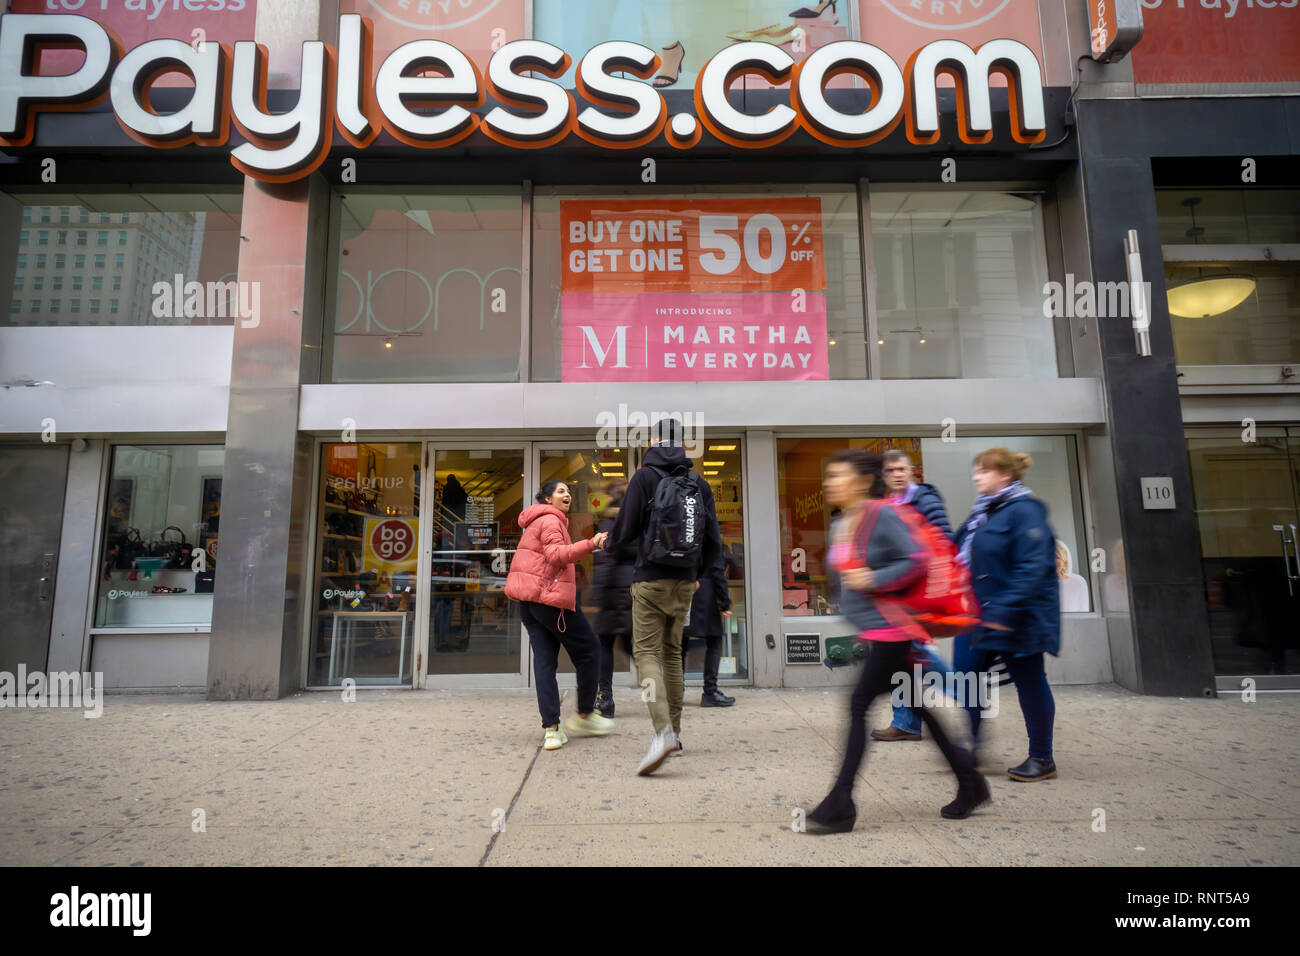 A Payless ShoeSource store in Herald Square in New York on Friday, February  15, 2019. The retailer is reported to be planning to close all 2300 stores  as it files for bankruptcy